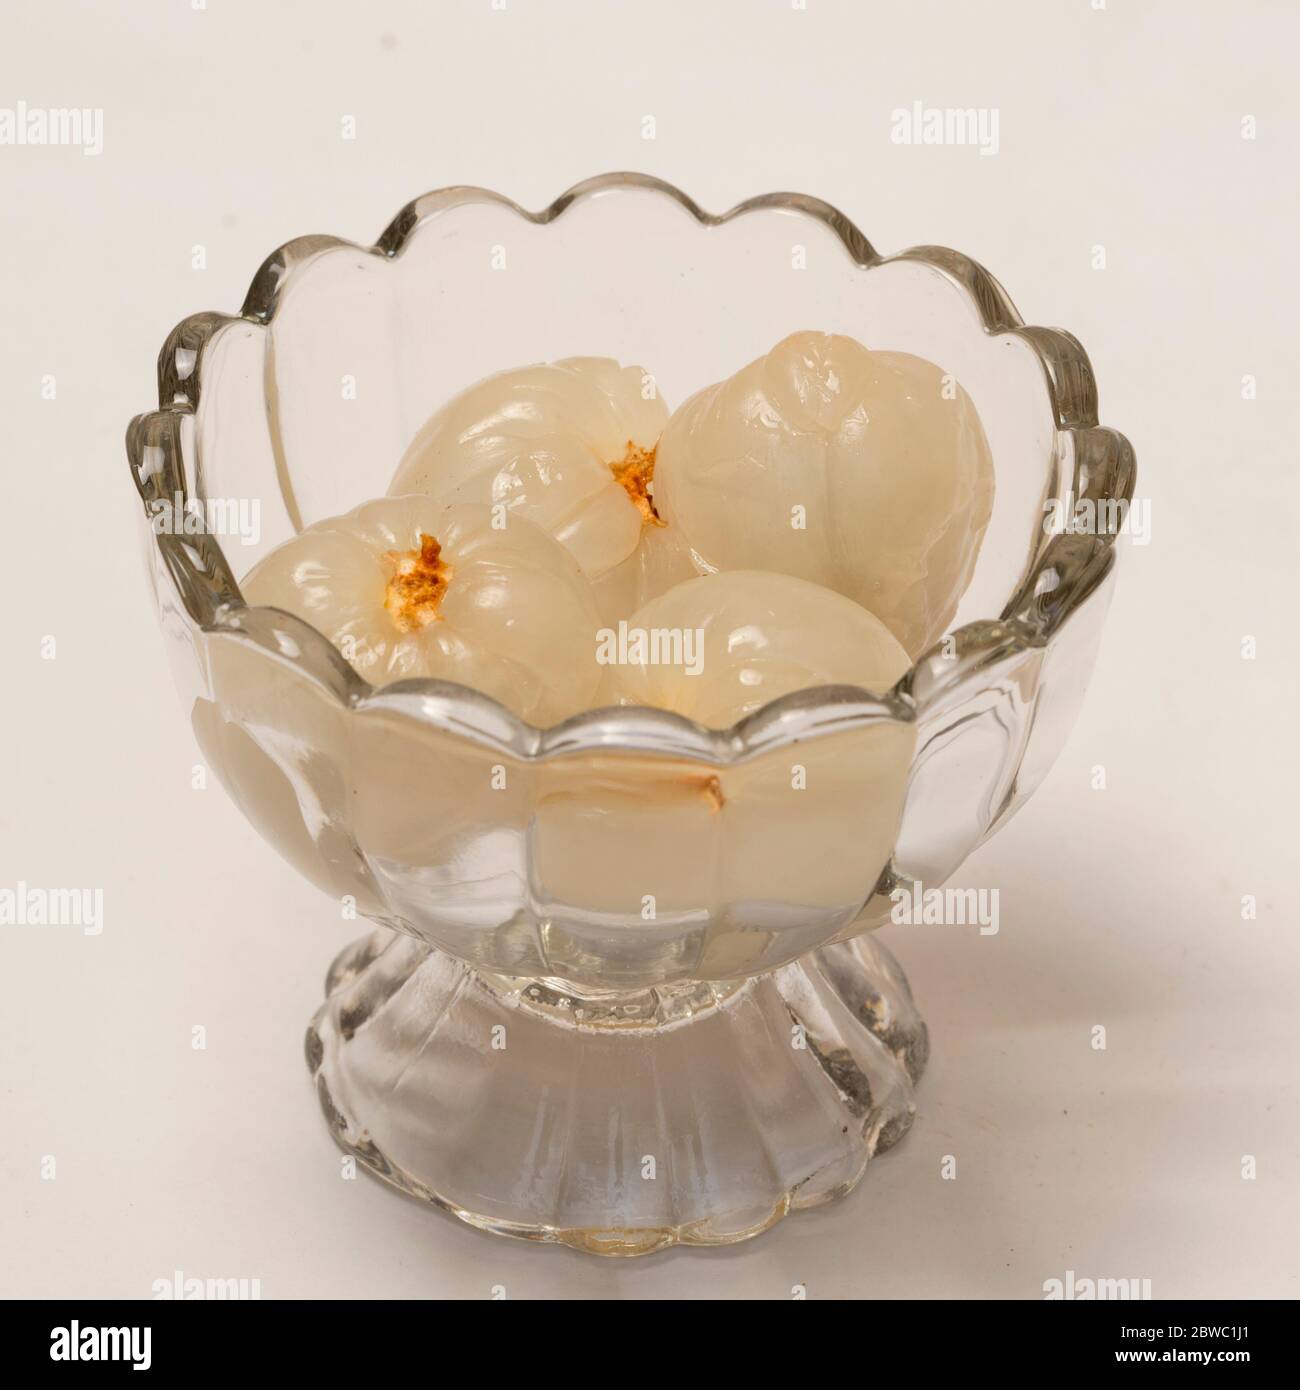 Close-up view of ripe lychee in a glass bowl on white background. Stock Photo